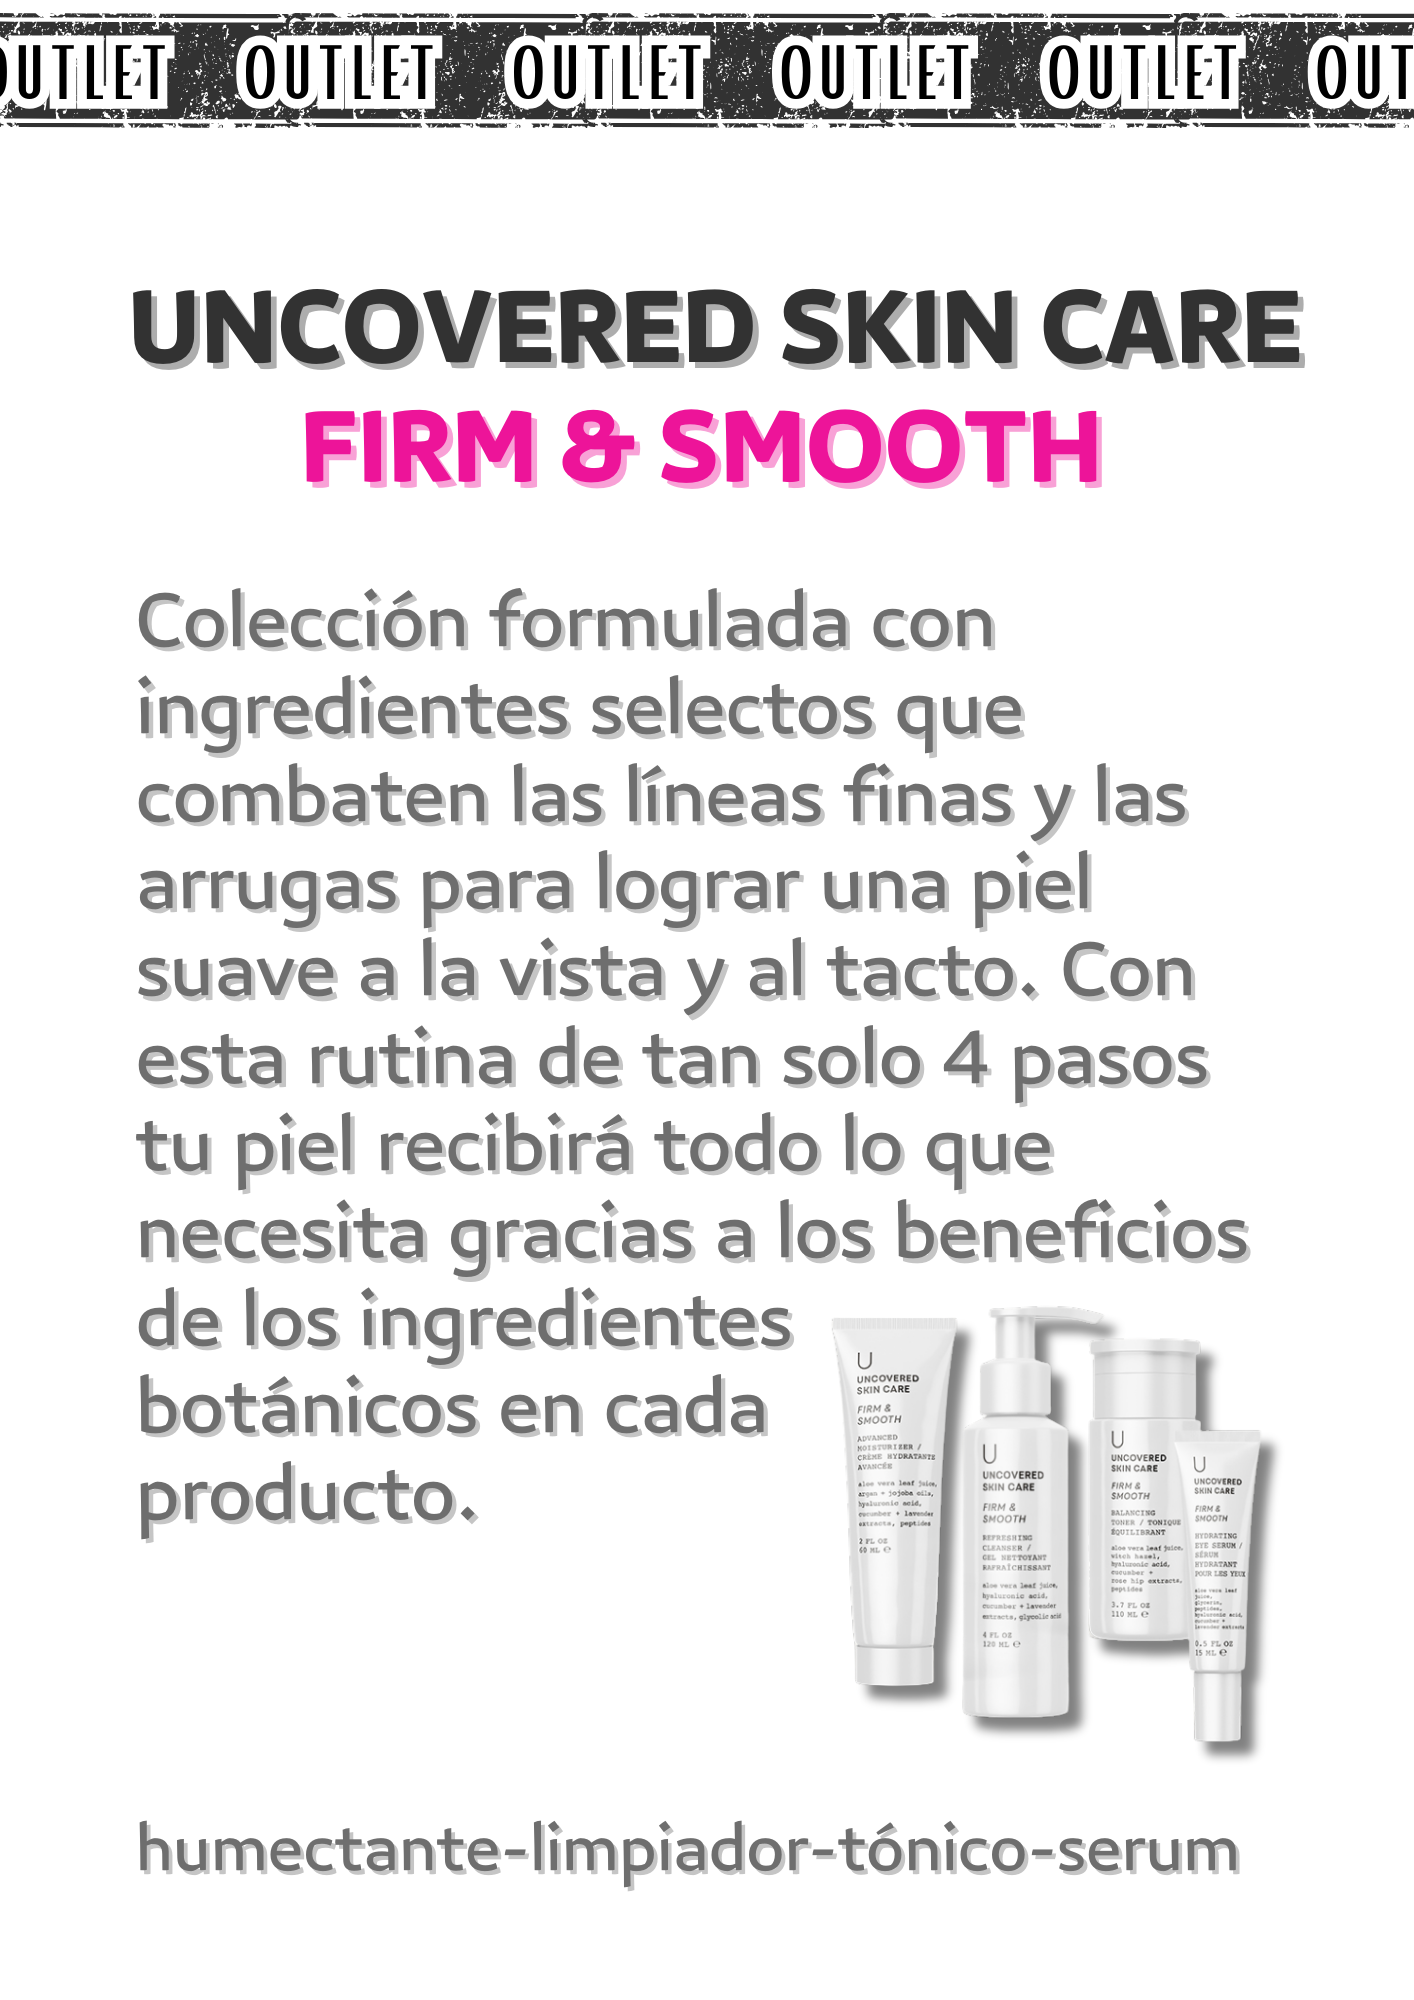 Uncovered Skin Care Set Firm & Smooth (61) - OUTLET